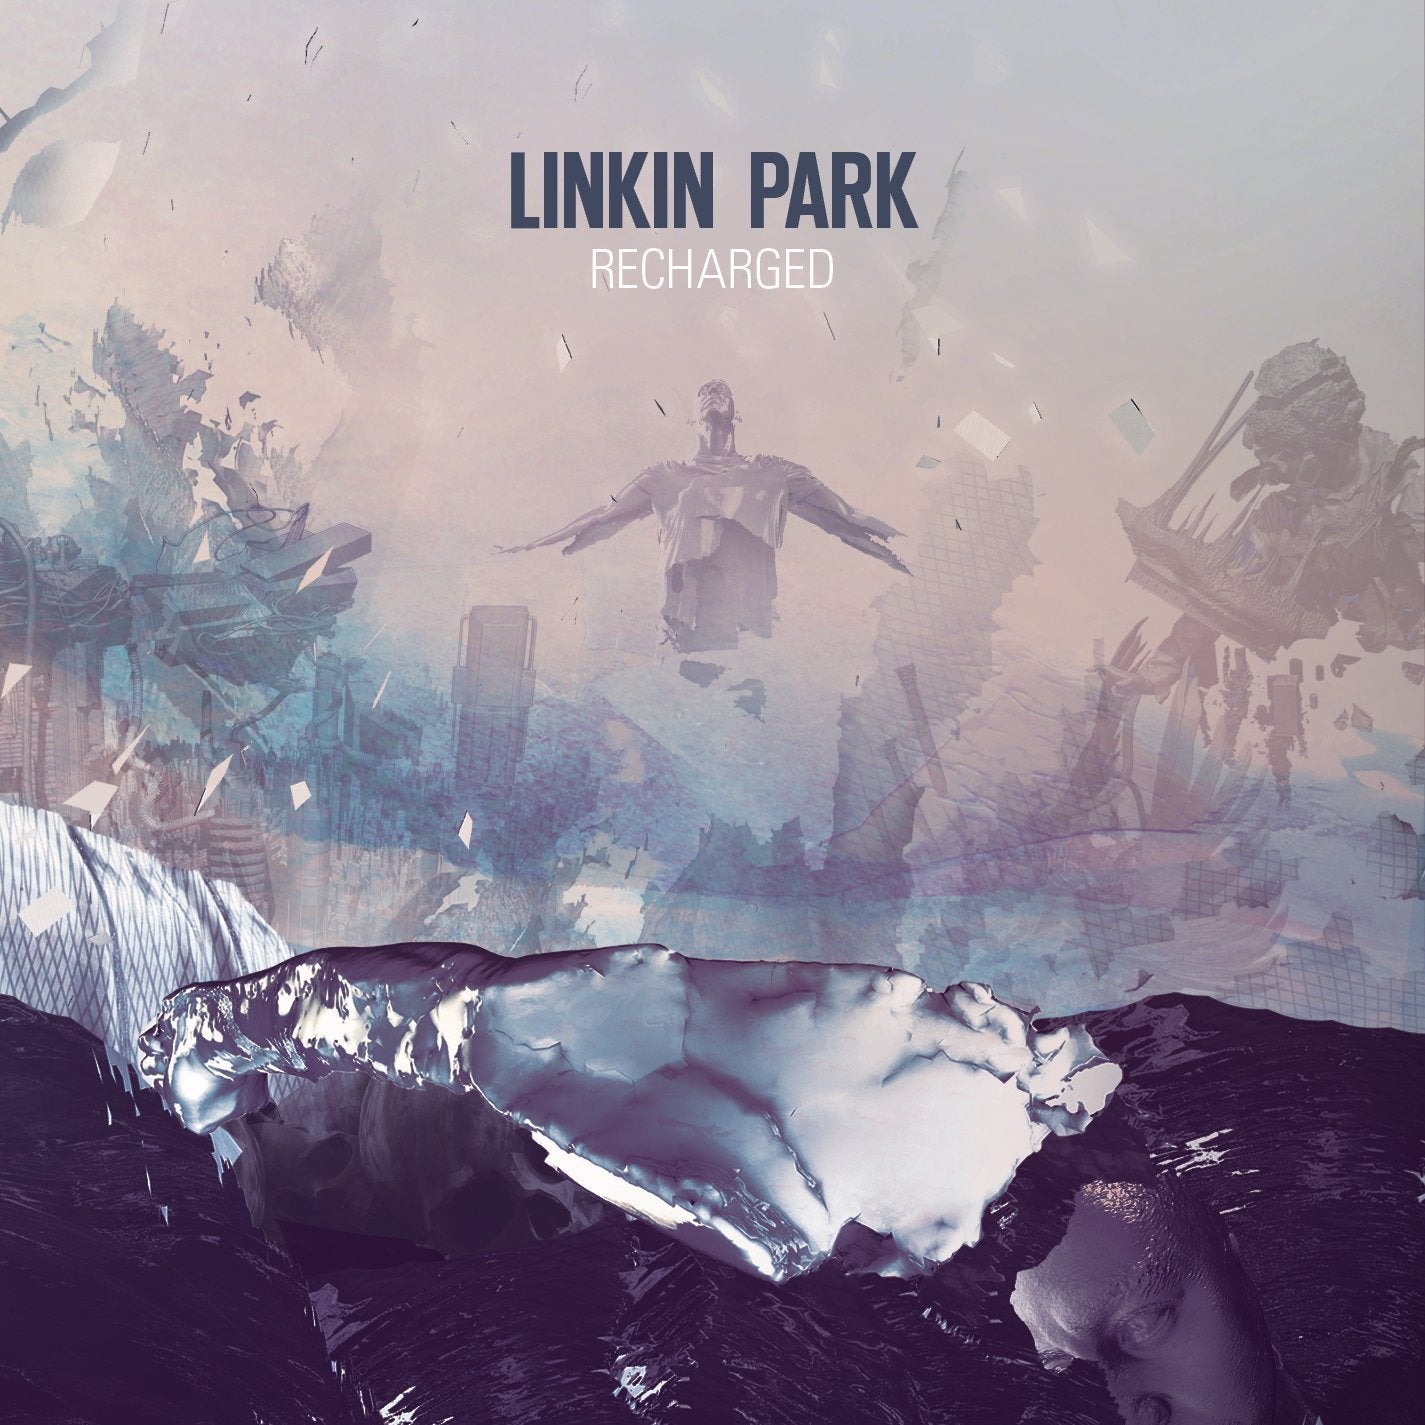 Linkin Park "Recharged" CD